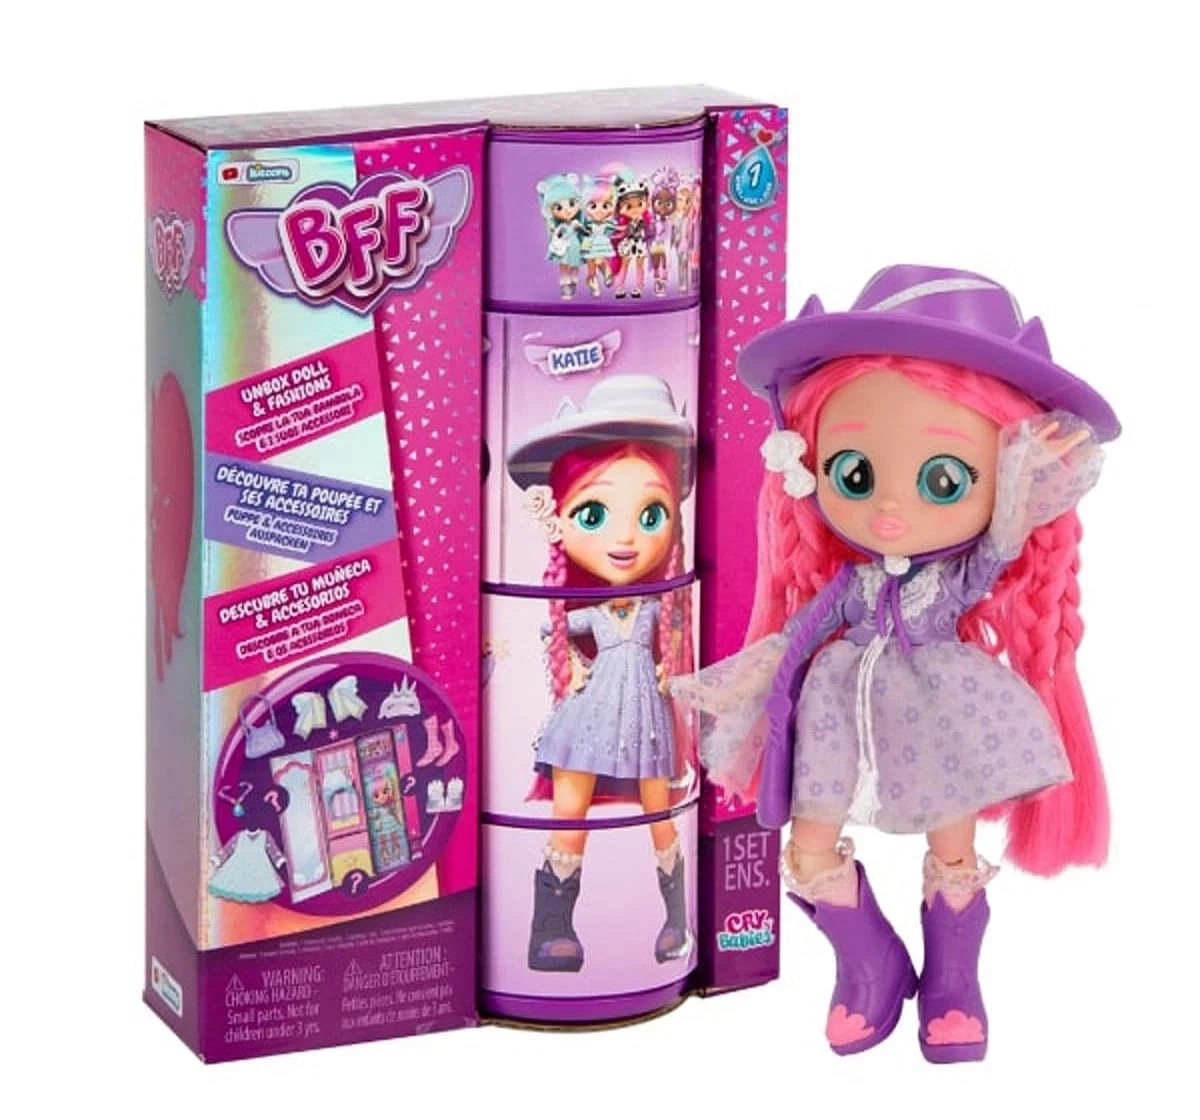 Best Friends Forever Series Fashion Play Doll Katie with Long Hair & Glass Eyes, Dolls For Kids, 